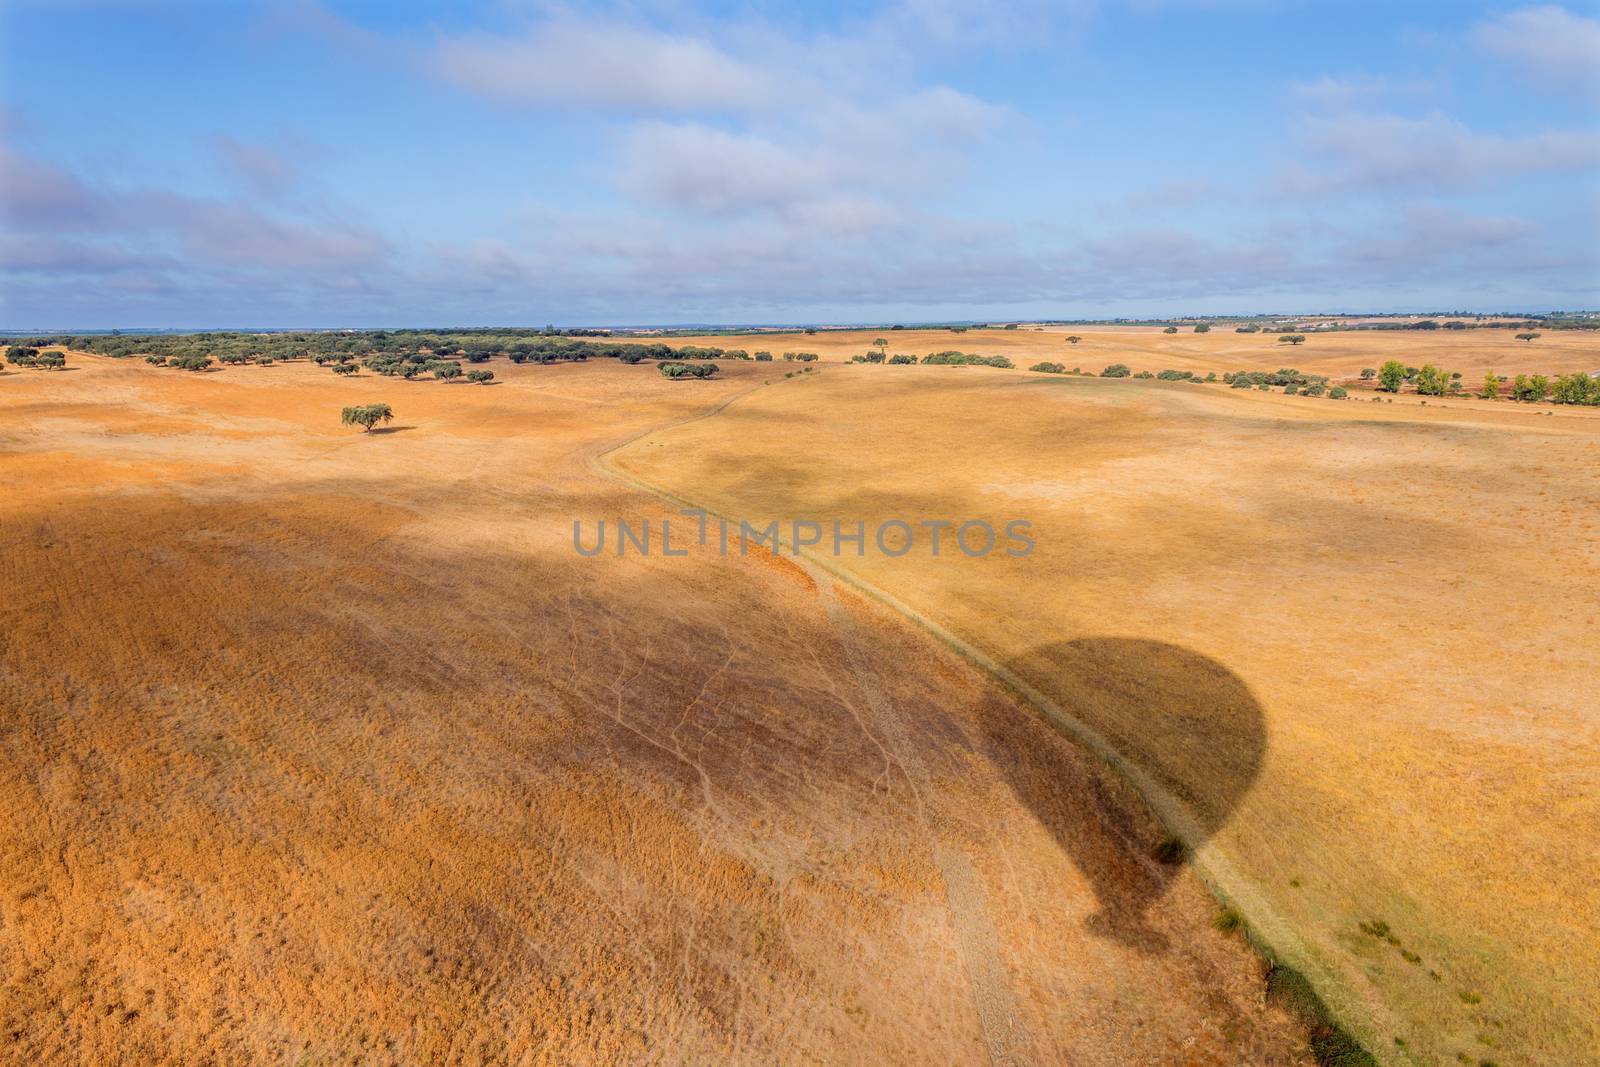 Hot air balloon view of the Alentejo region, above the fields. Portugal.